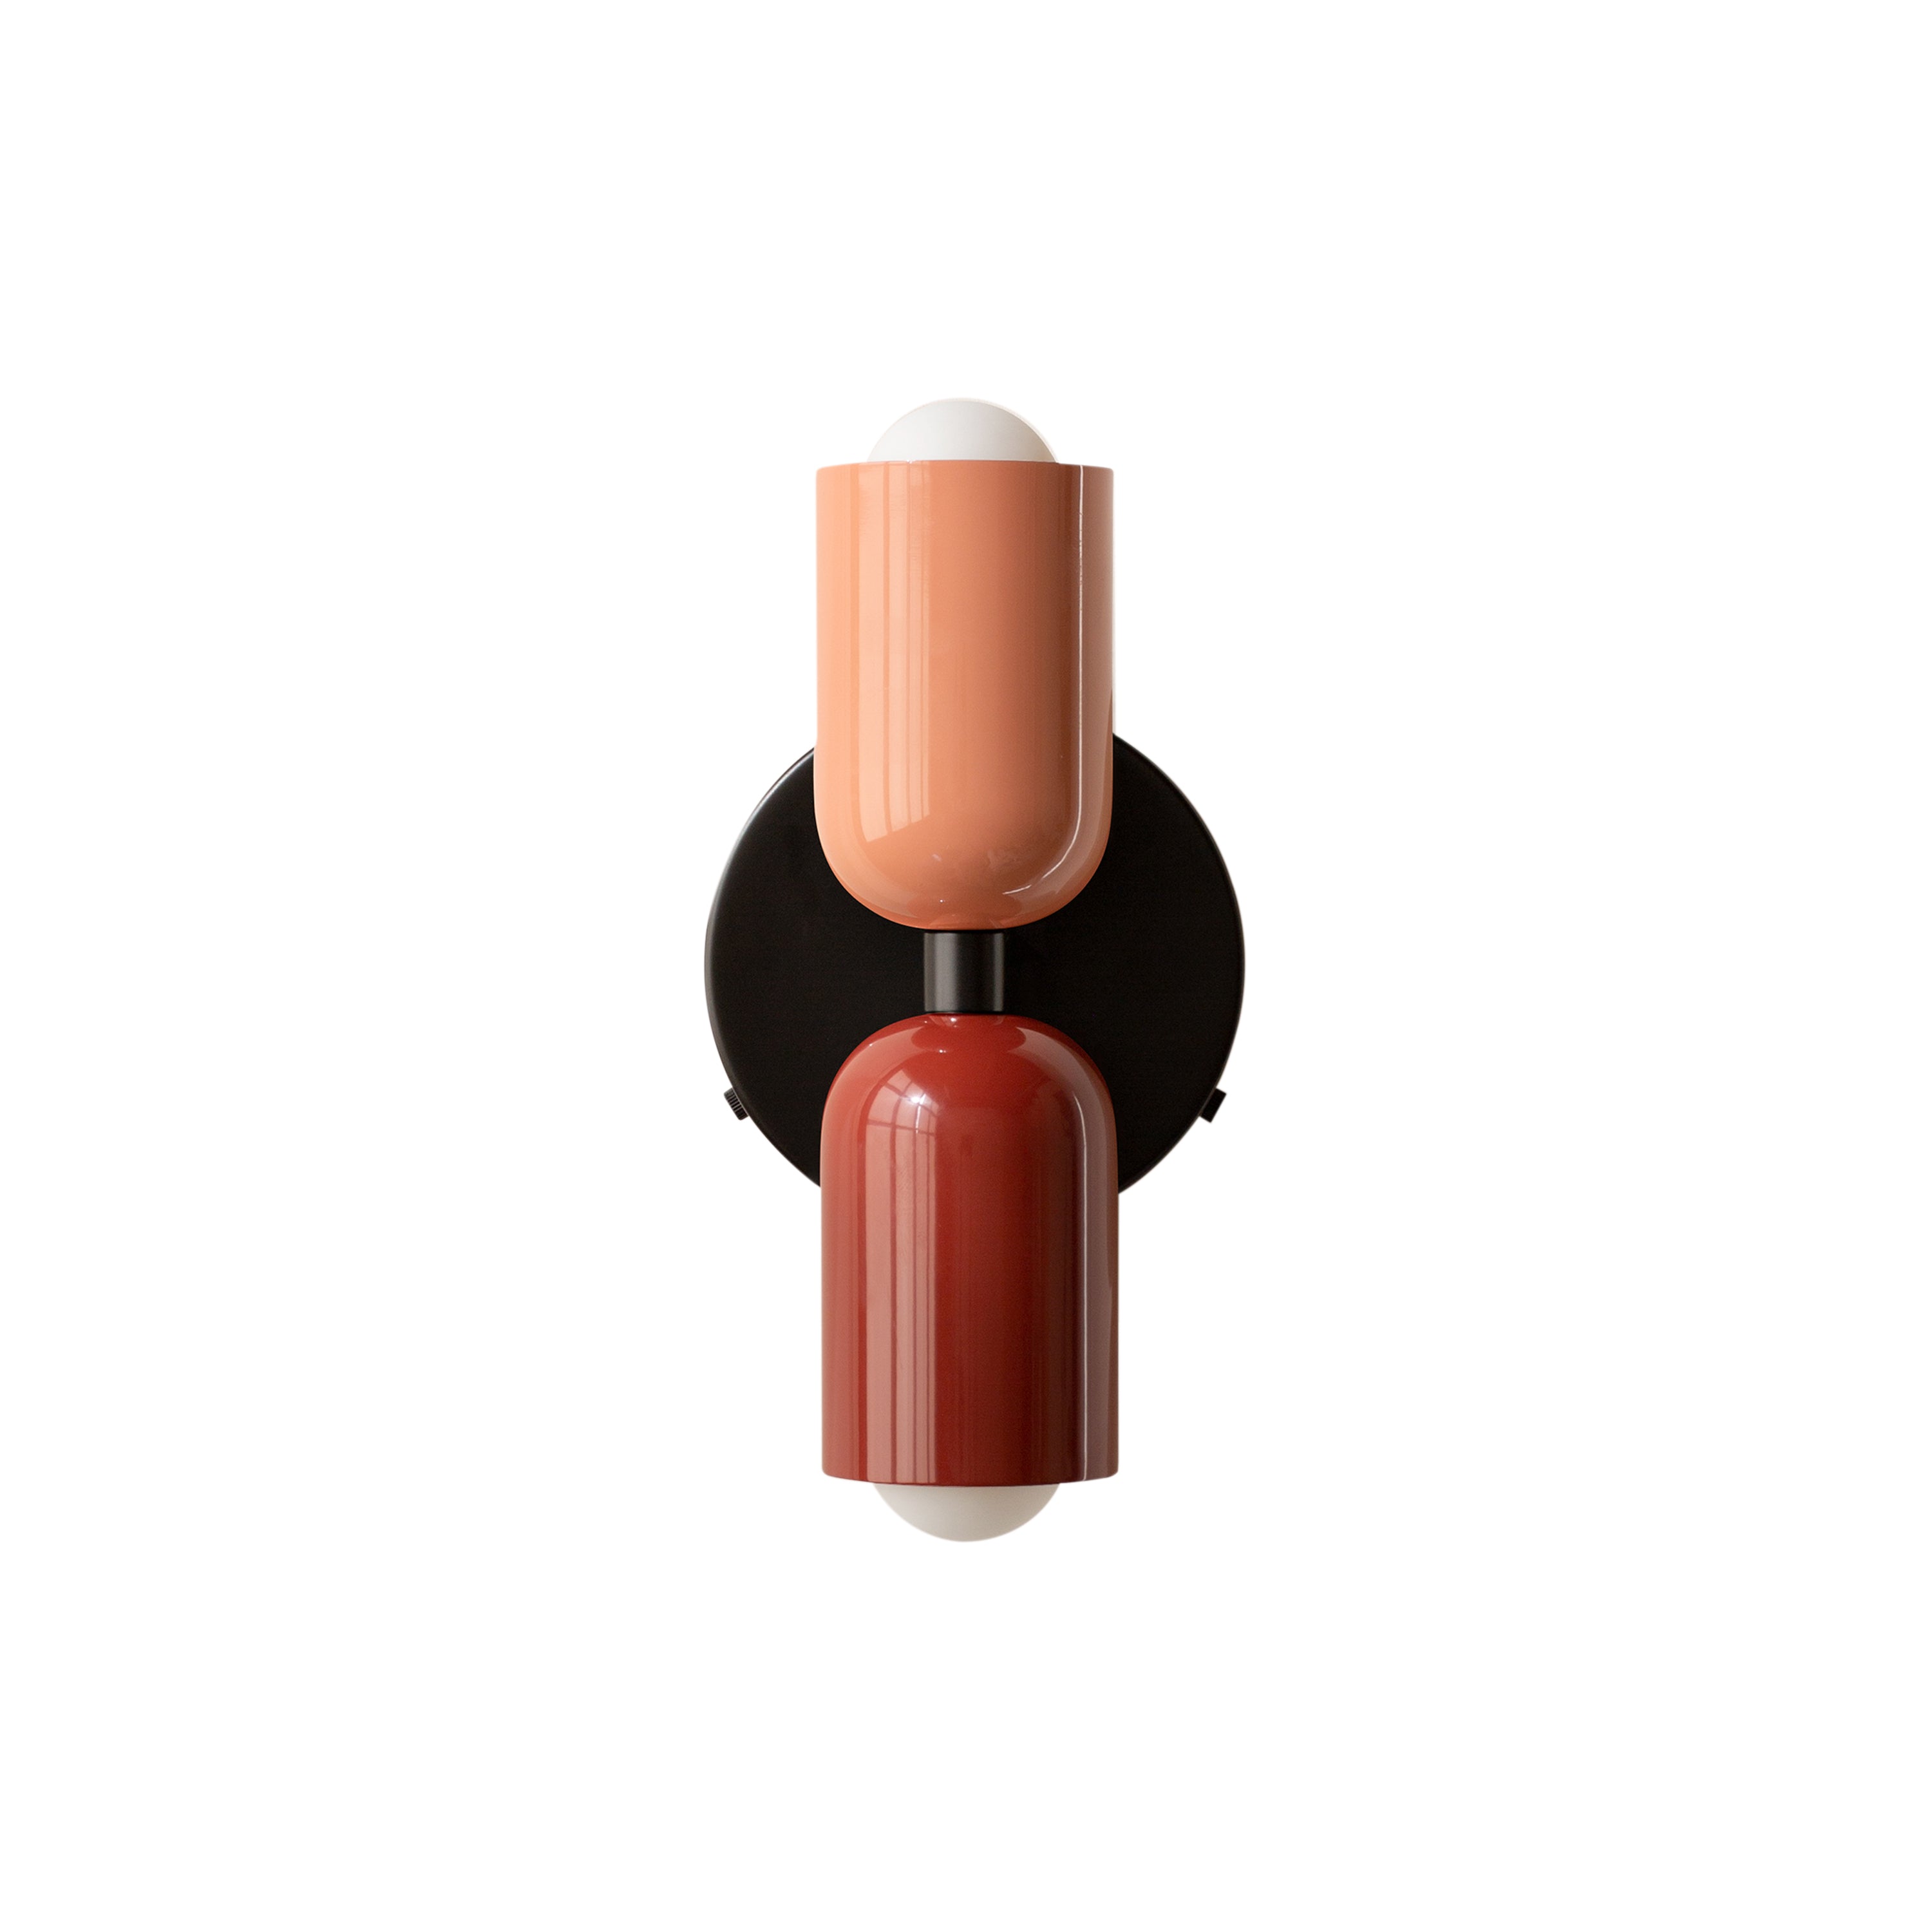 Up Down Sconce: Duo-Tone: + Peach + Oxide Red + Hardwire